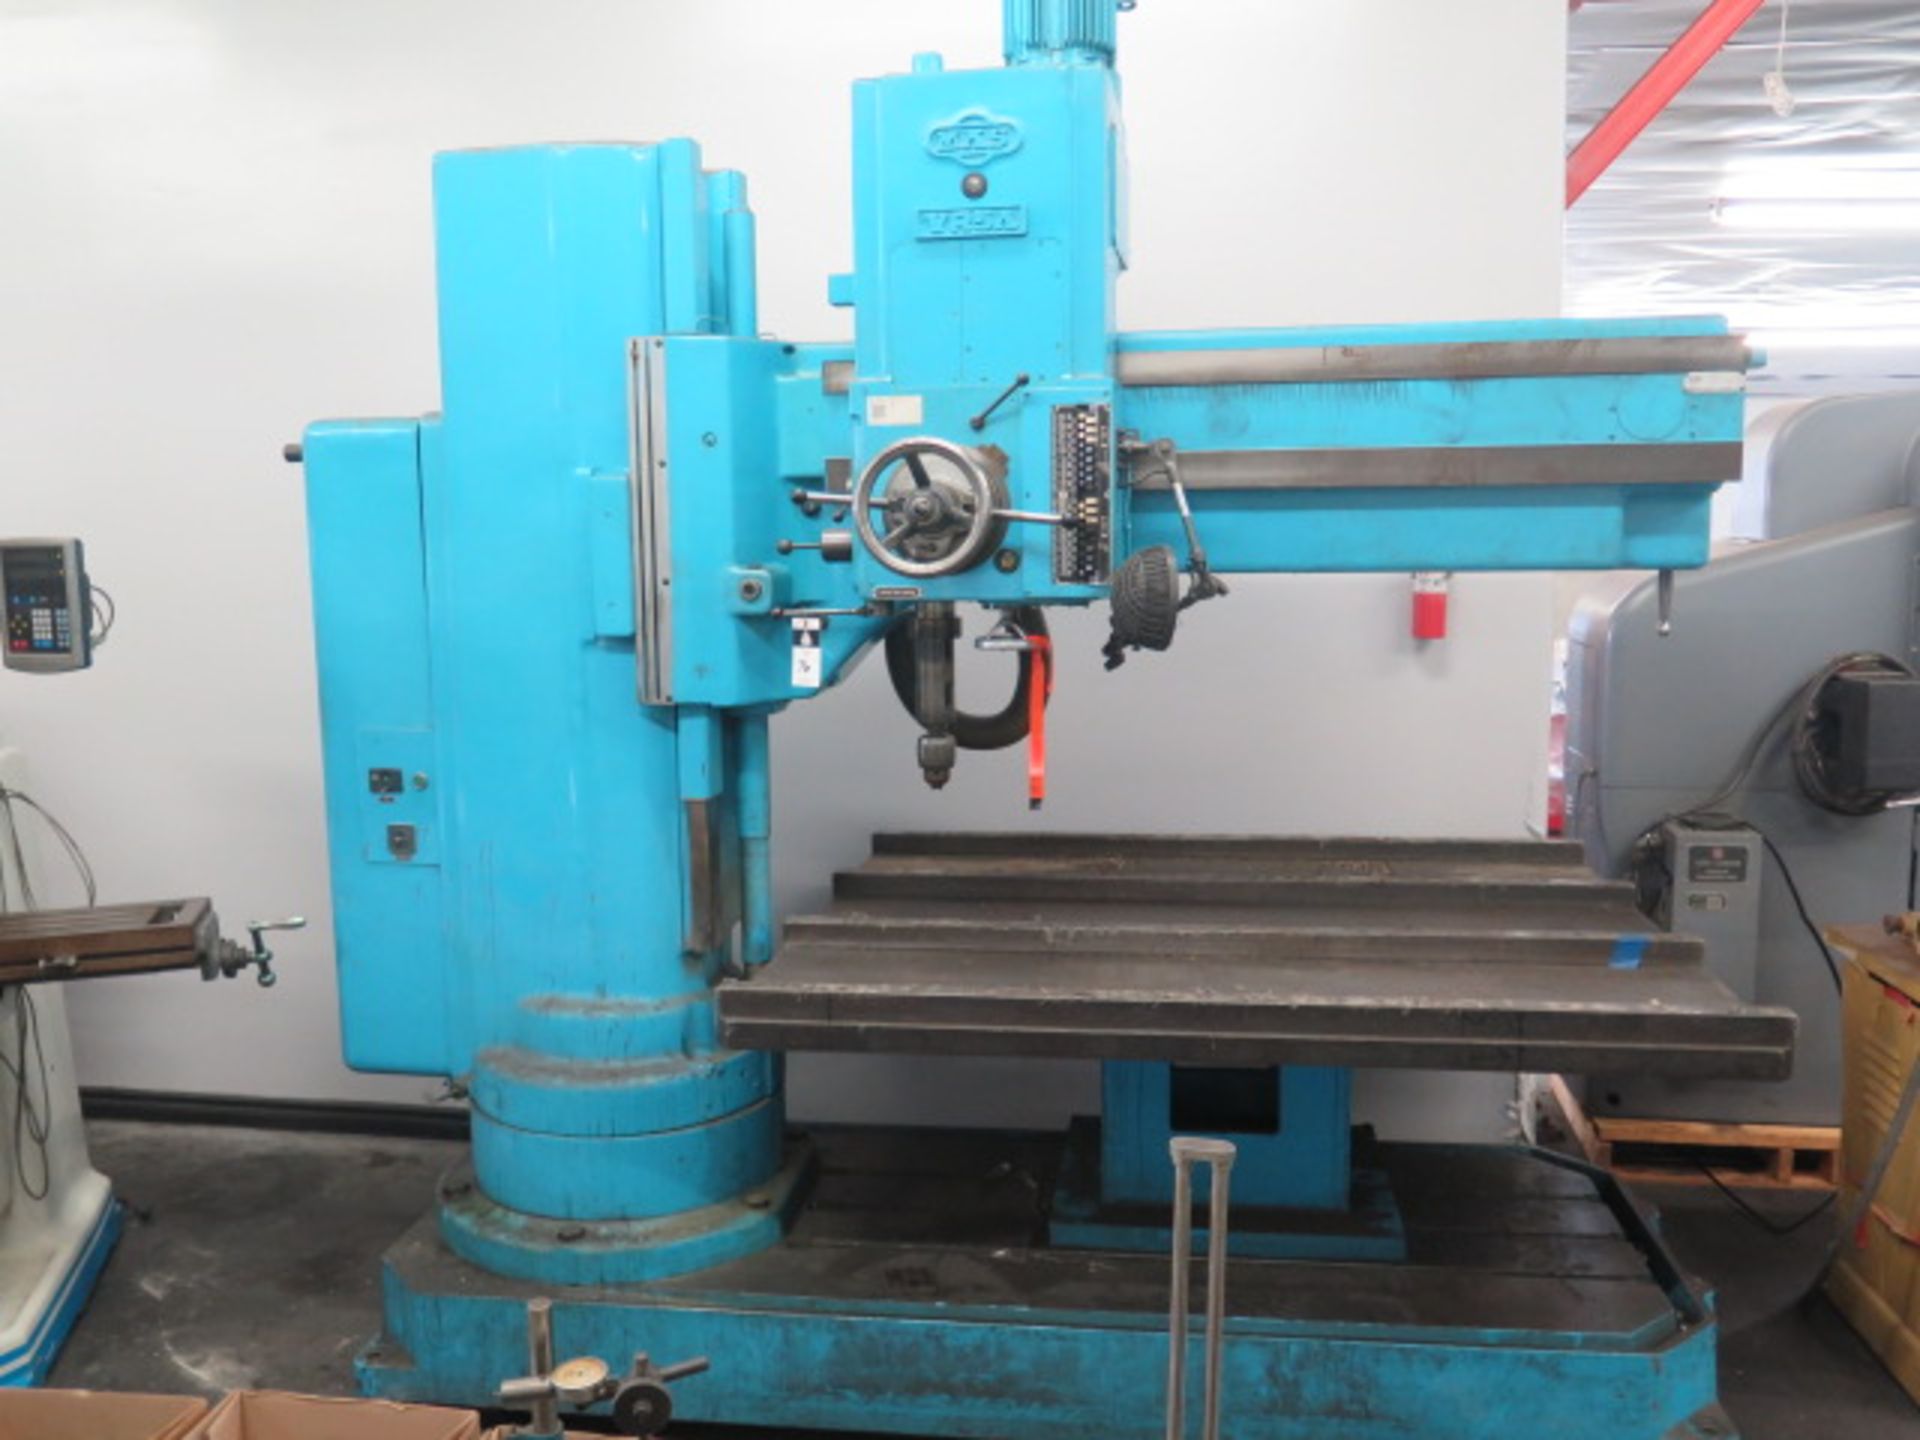 MAS mdl. VR5A 48” Radial Arm Drill, w/ 28-2500 Push Button RPM, Power Feeds, 60” x 72”, SOLD AS IS